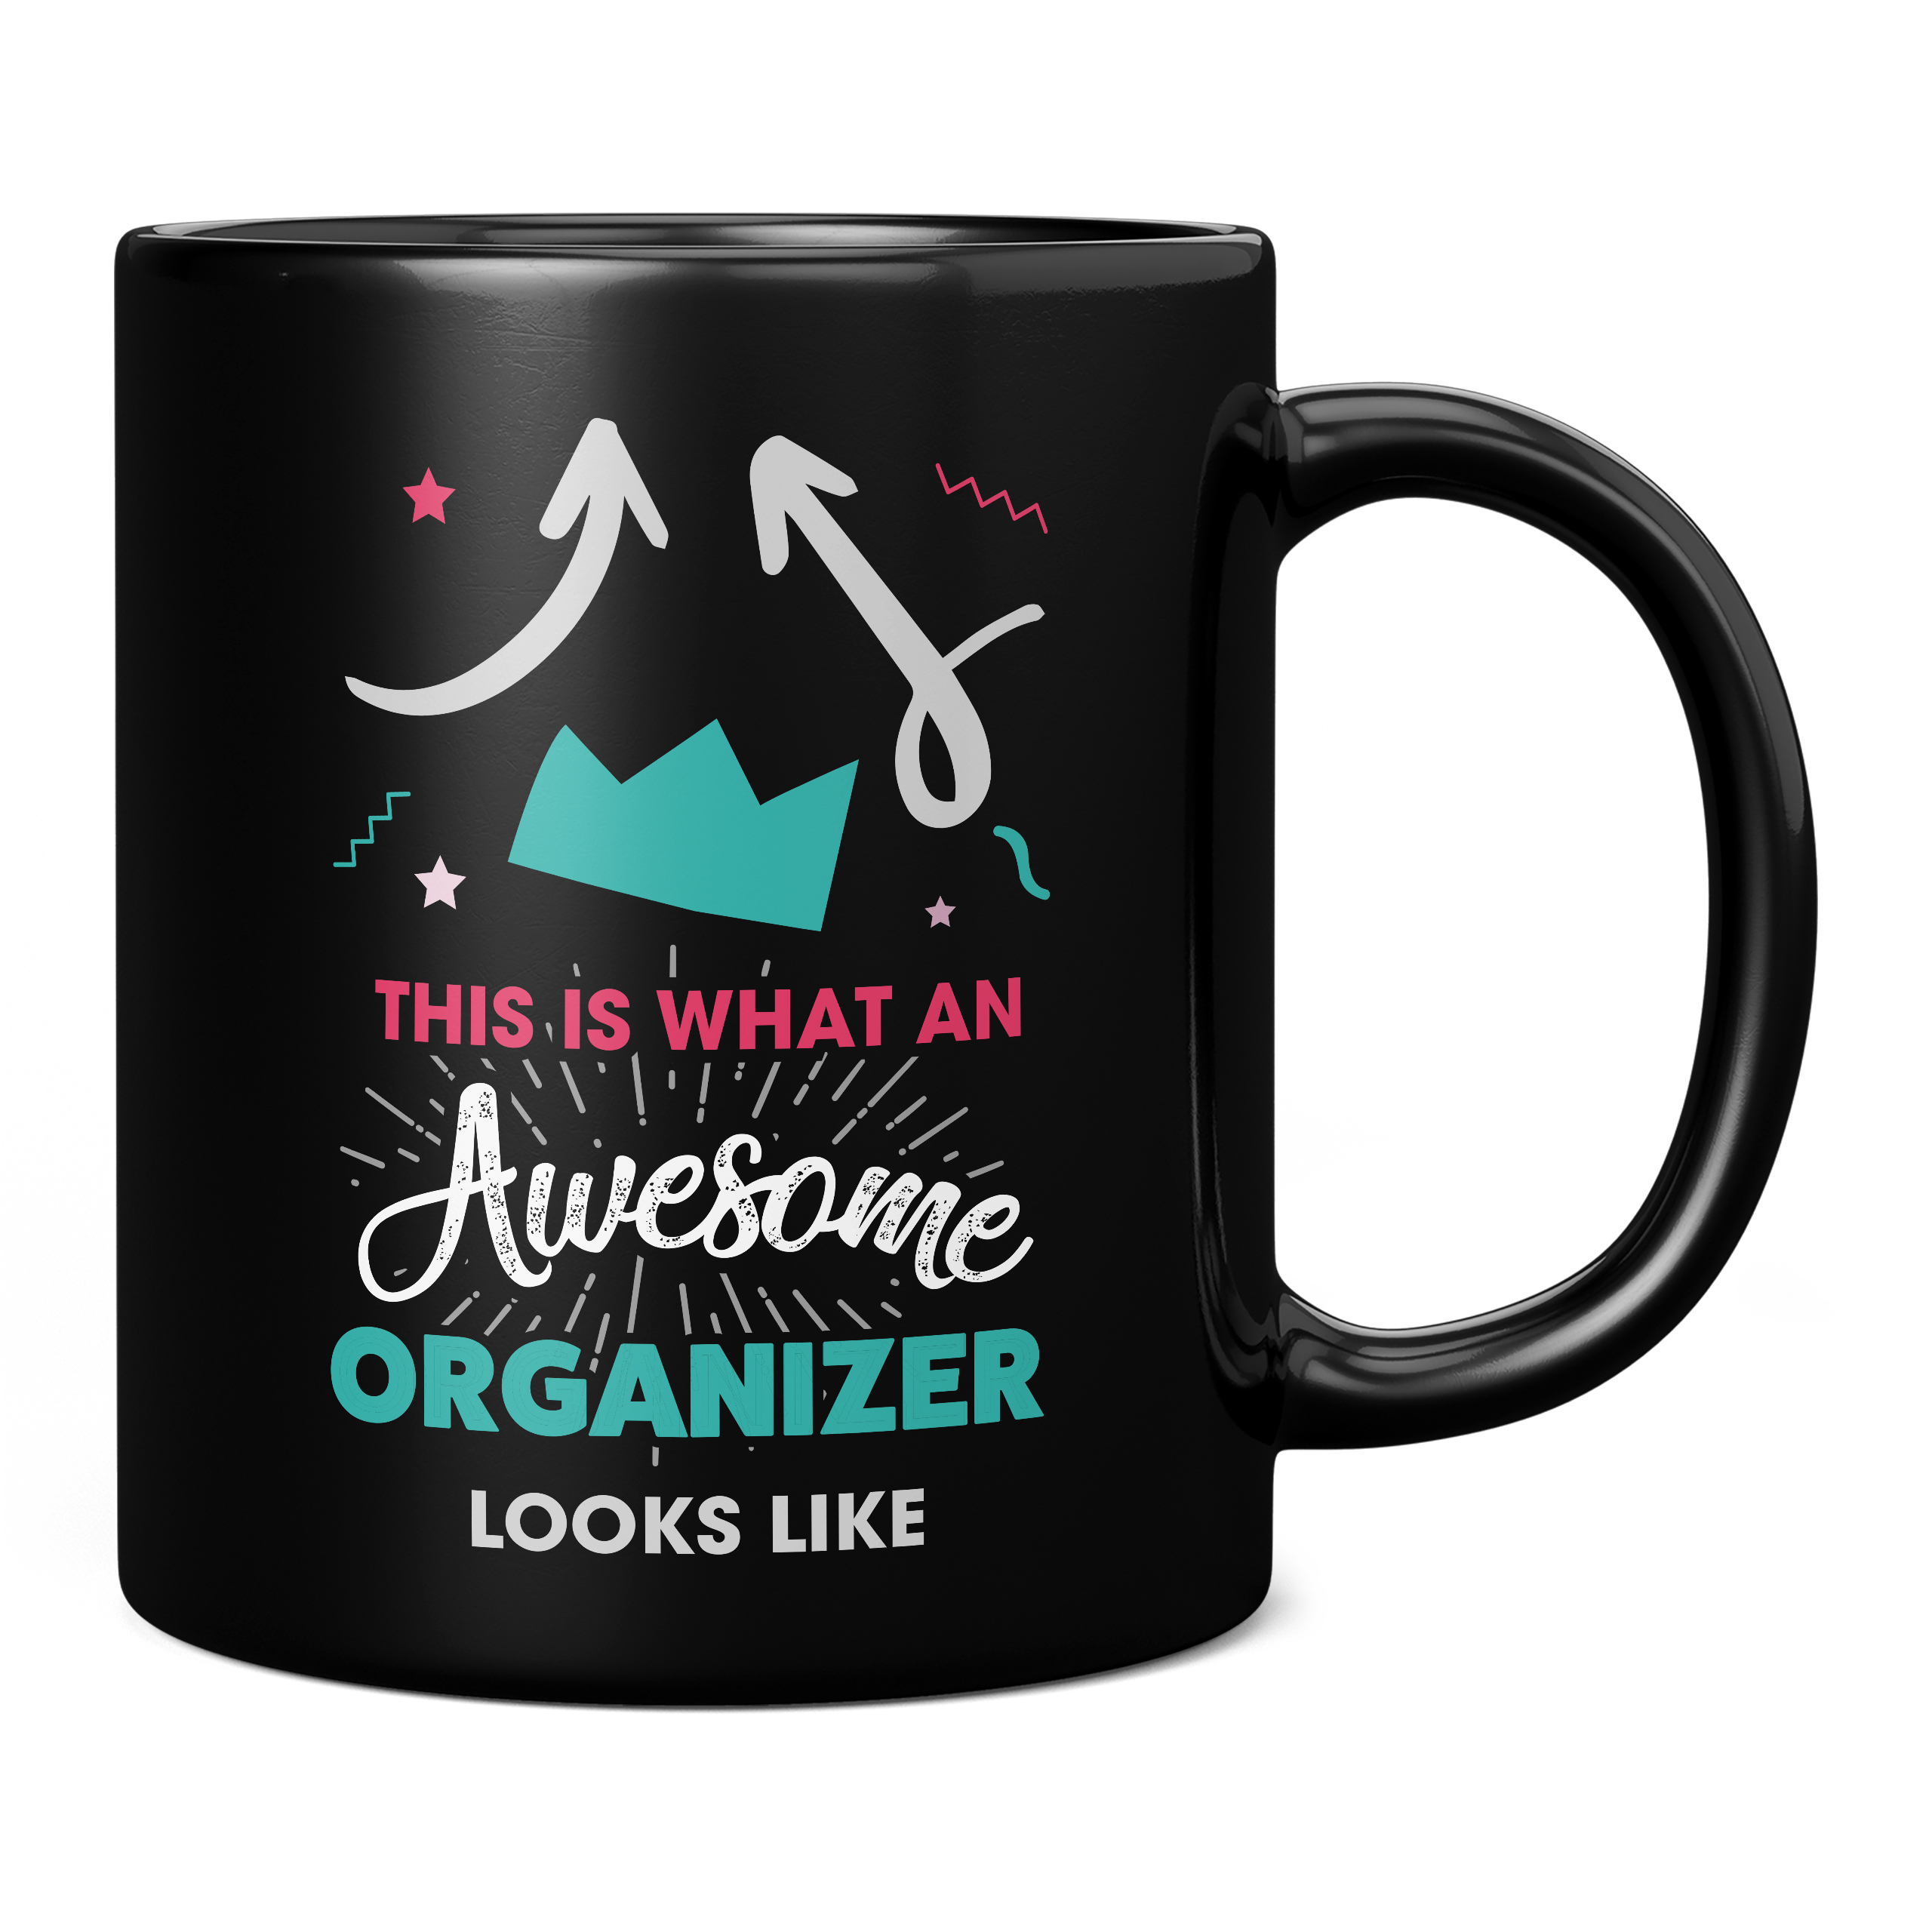 THIS IS WHAT AN AWESOME ORGANIZER LOOKS LIKE 11OZ NOVELTY MUG